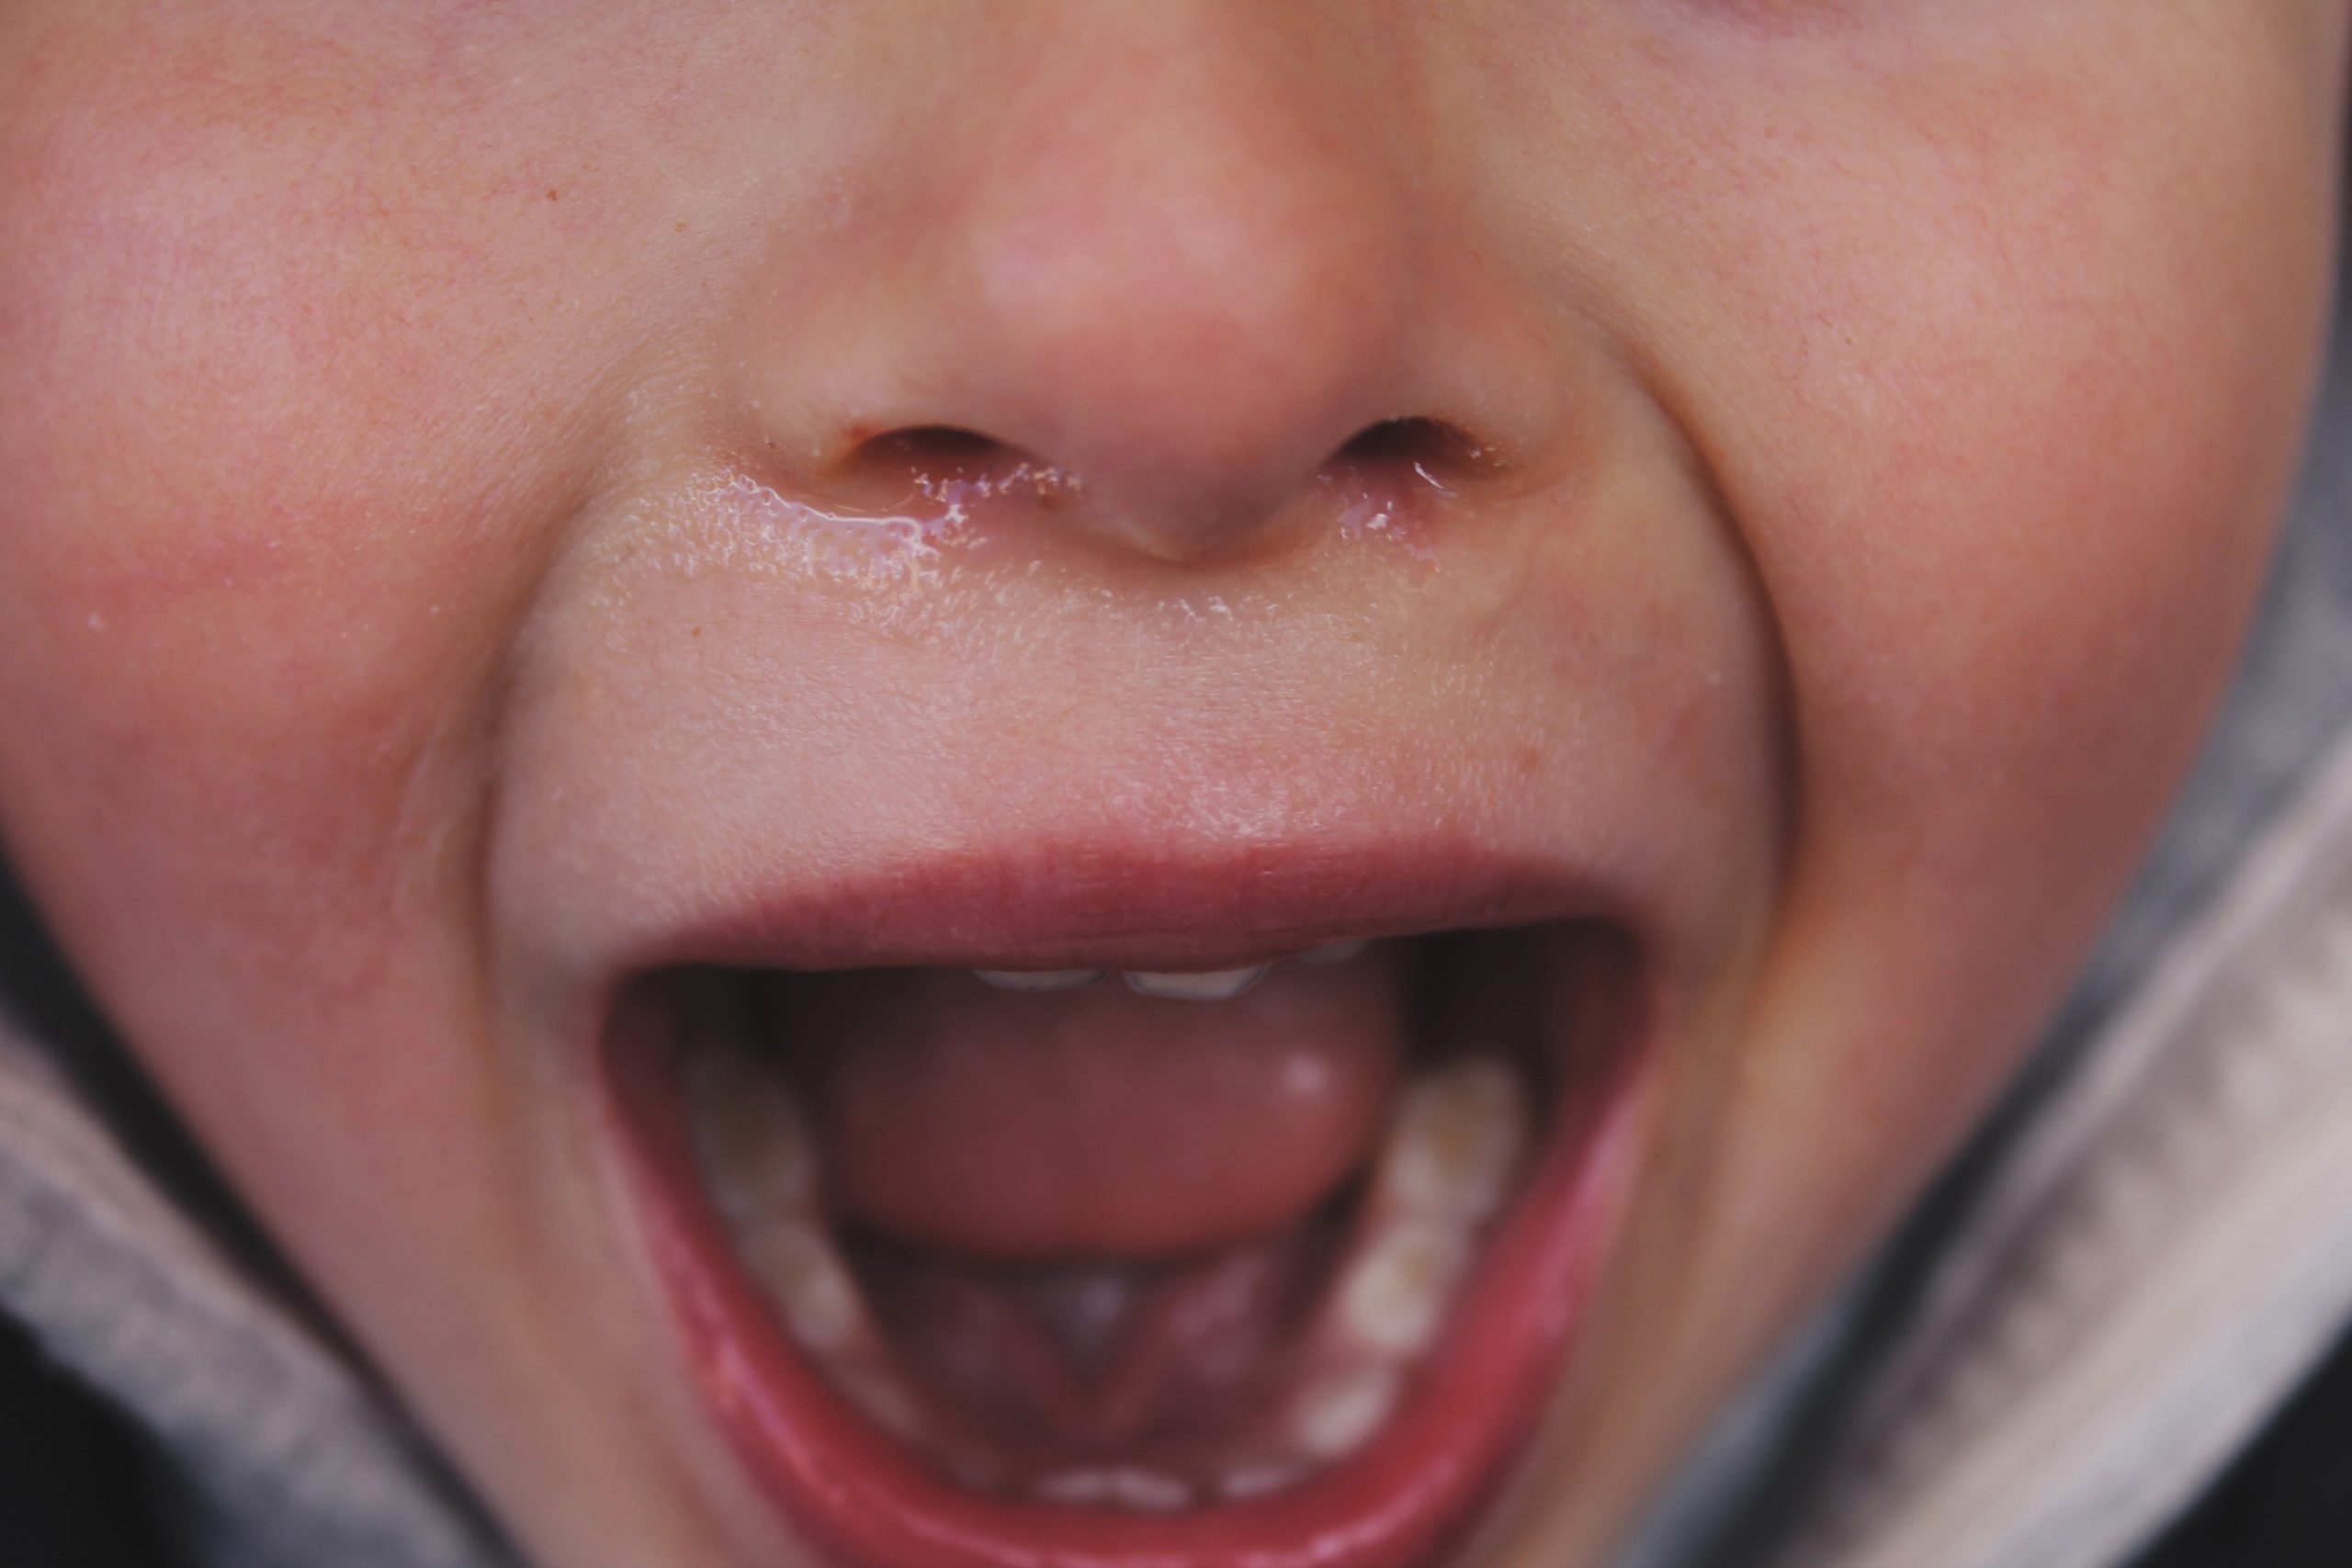 A child screams with an open mouth.